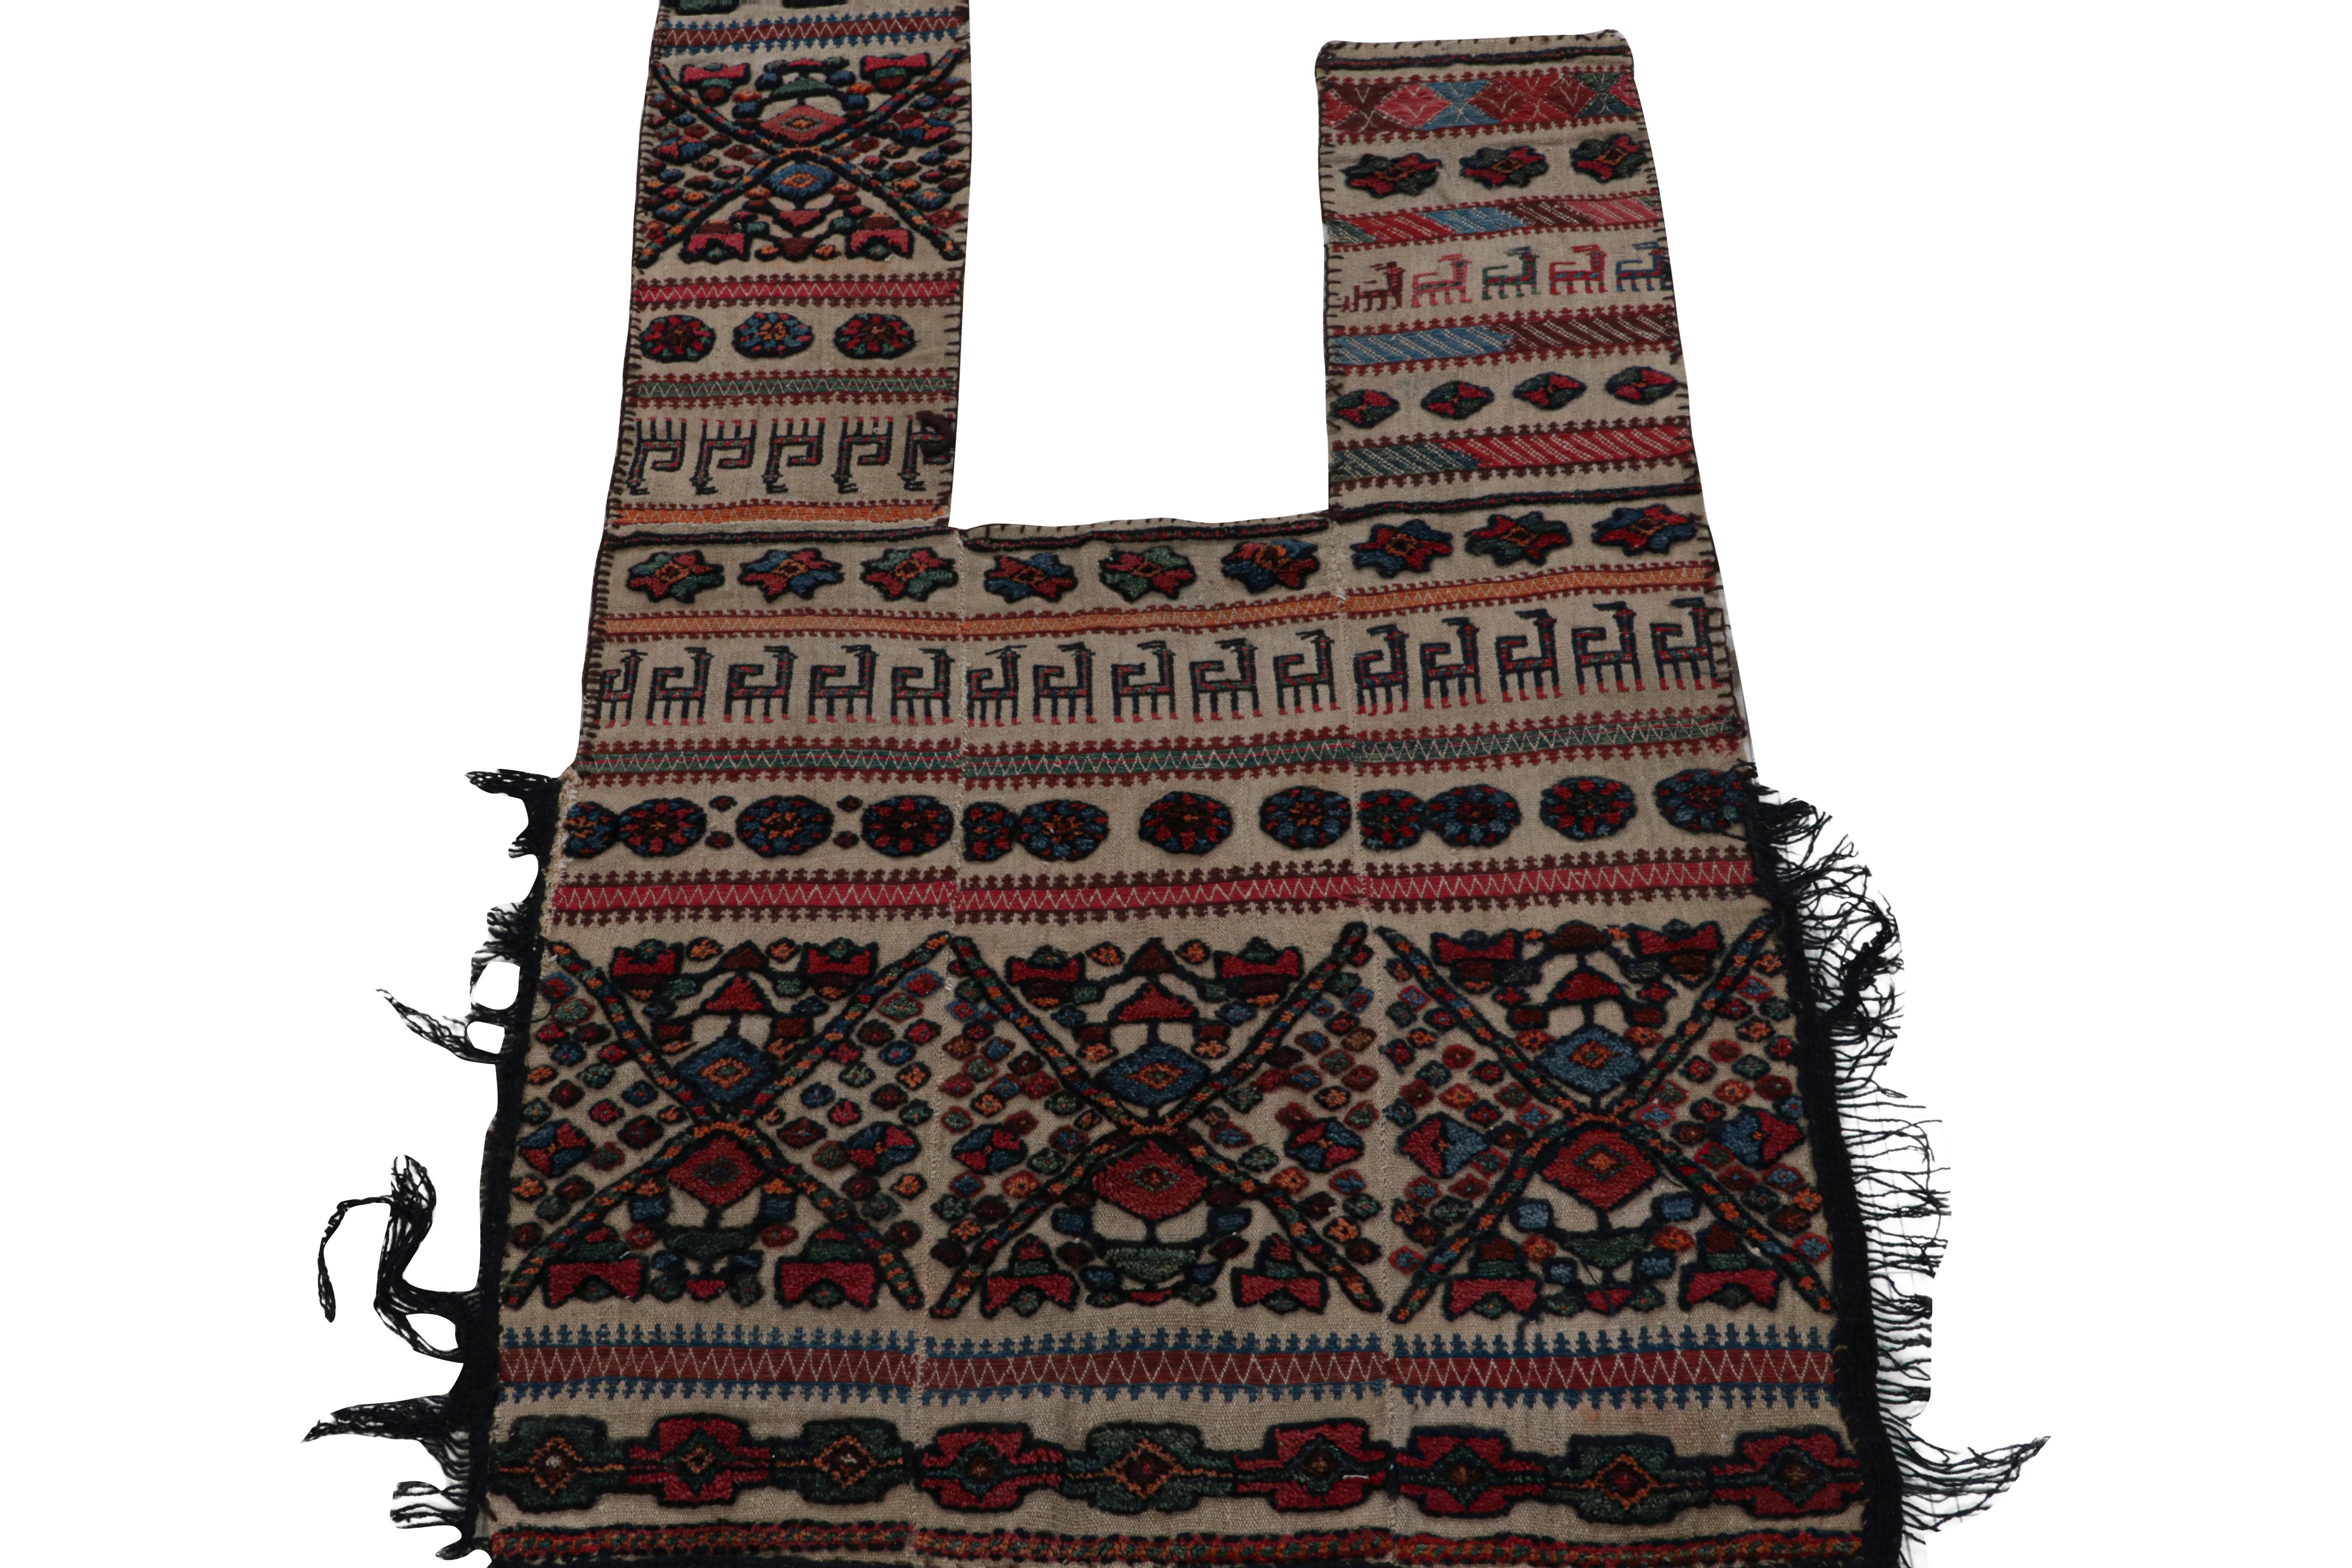 Tribal Antique Persian Horse Cover with Colorful Geometric Patterns, from Rug & Kilim For Sale